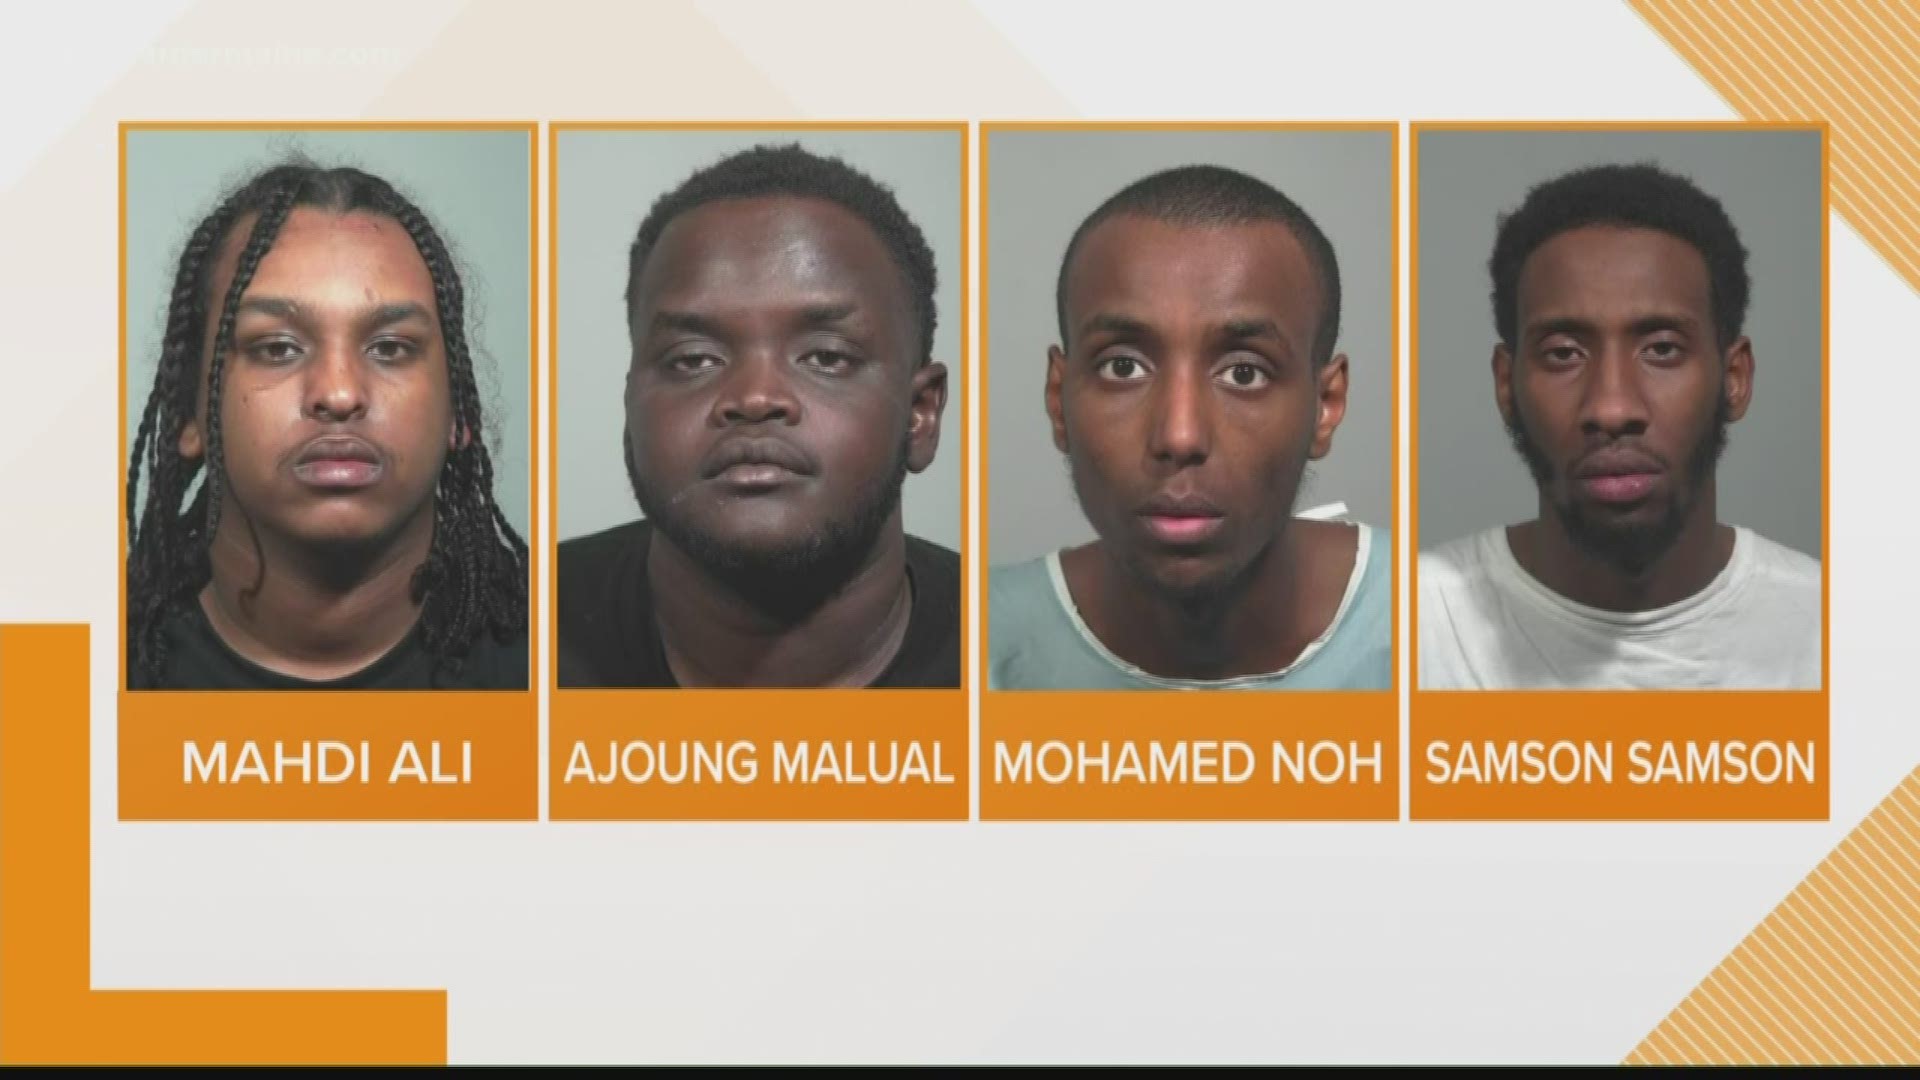 Ajoung Malual, Mohamed Noh, Samson Samson and Mahdi Ali have all been arrested in connection with a Casco shooting. A Naples man was shot